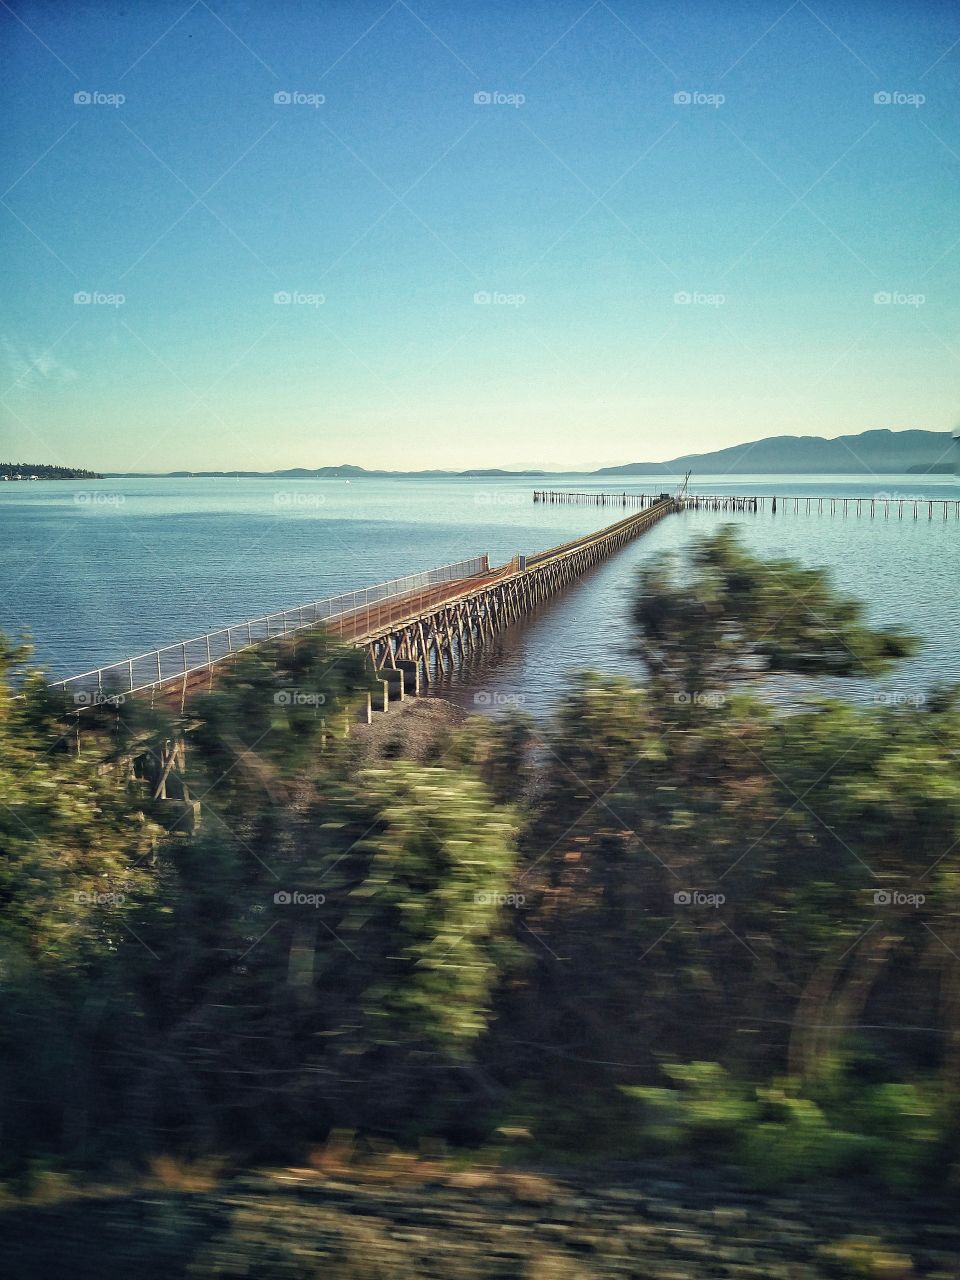 View From the Train